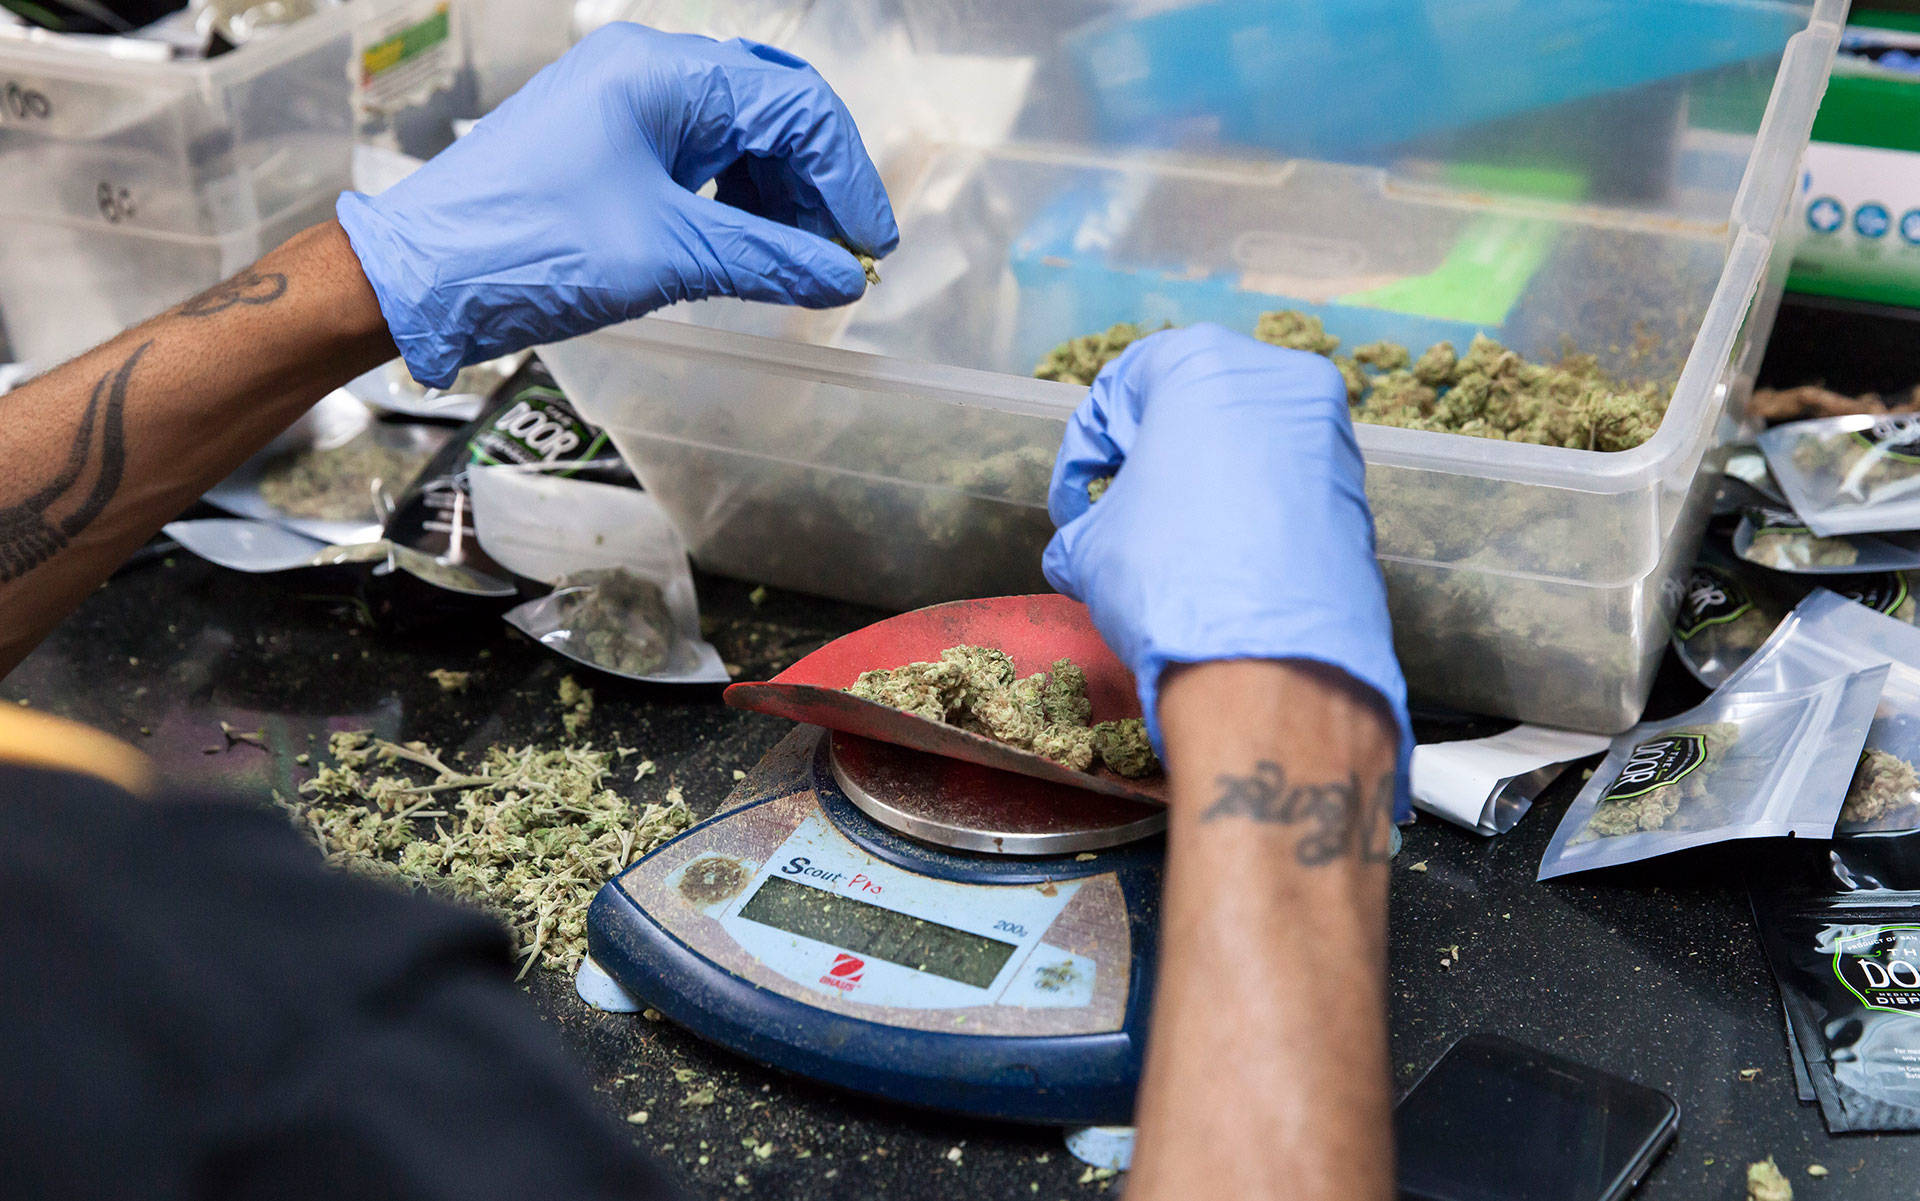 Cannabis buds are weighed out before being packaged at a medical marijuana dispensary in San Francisco. Brittany Hosea-Small/KQED